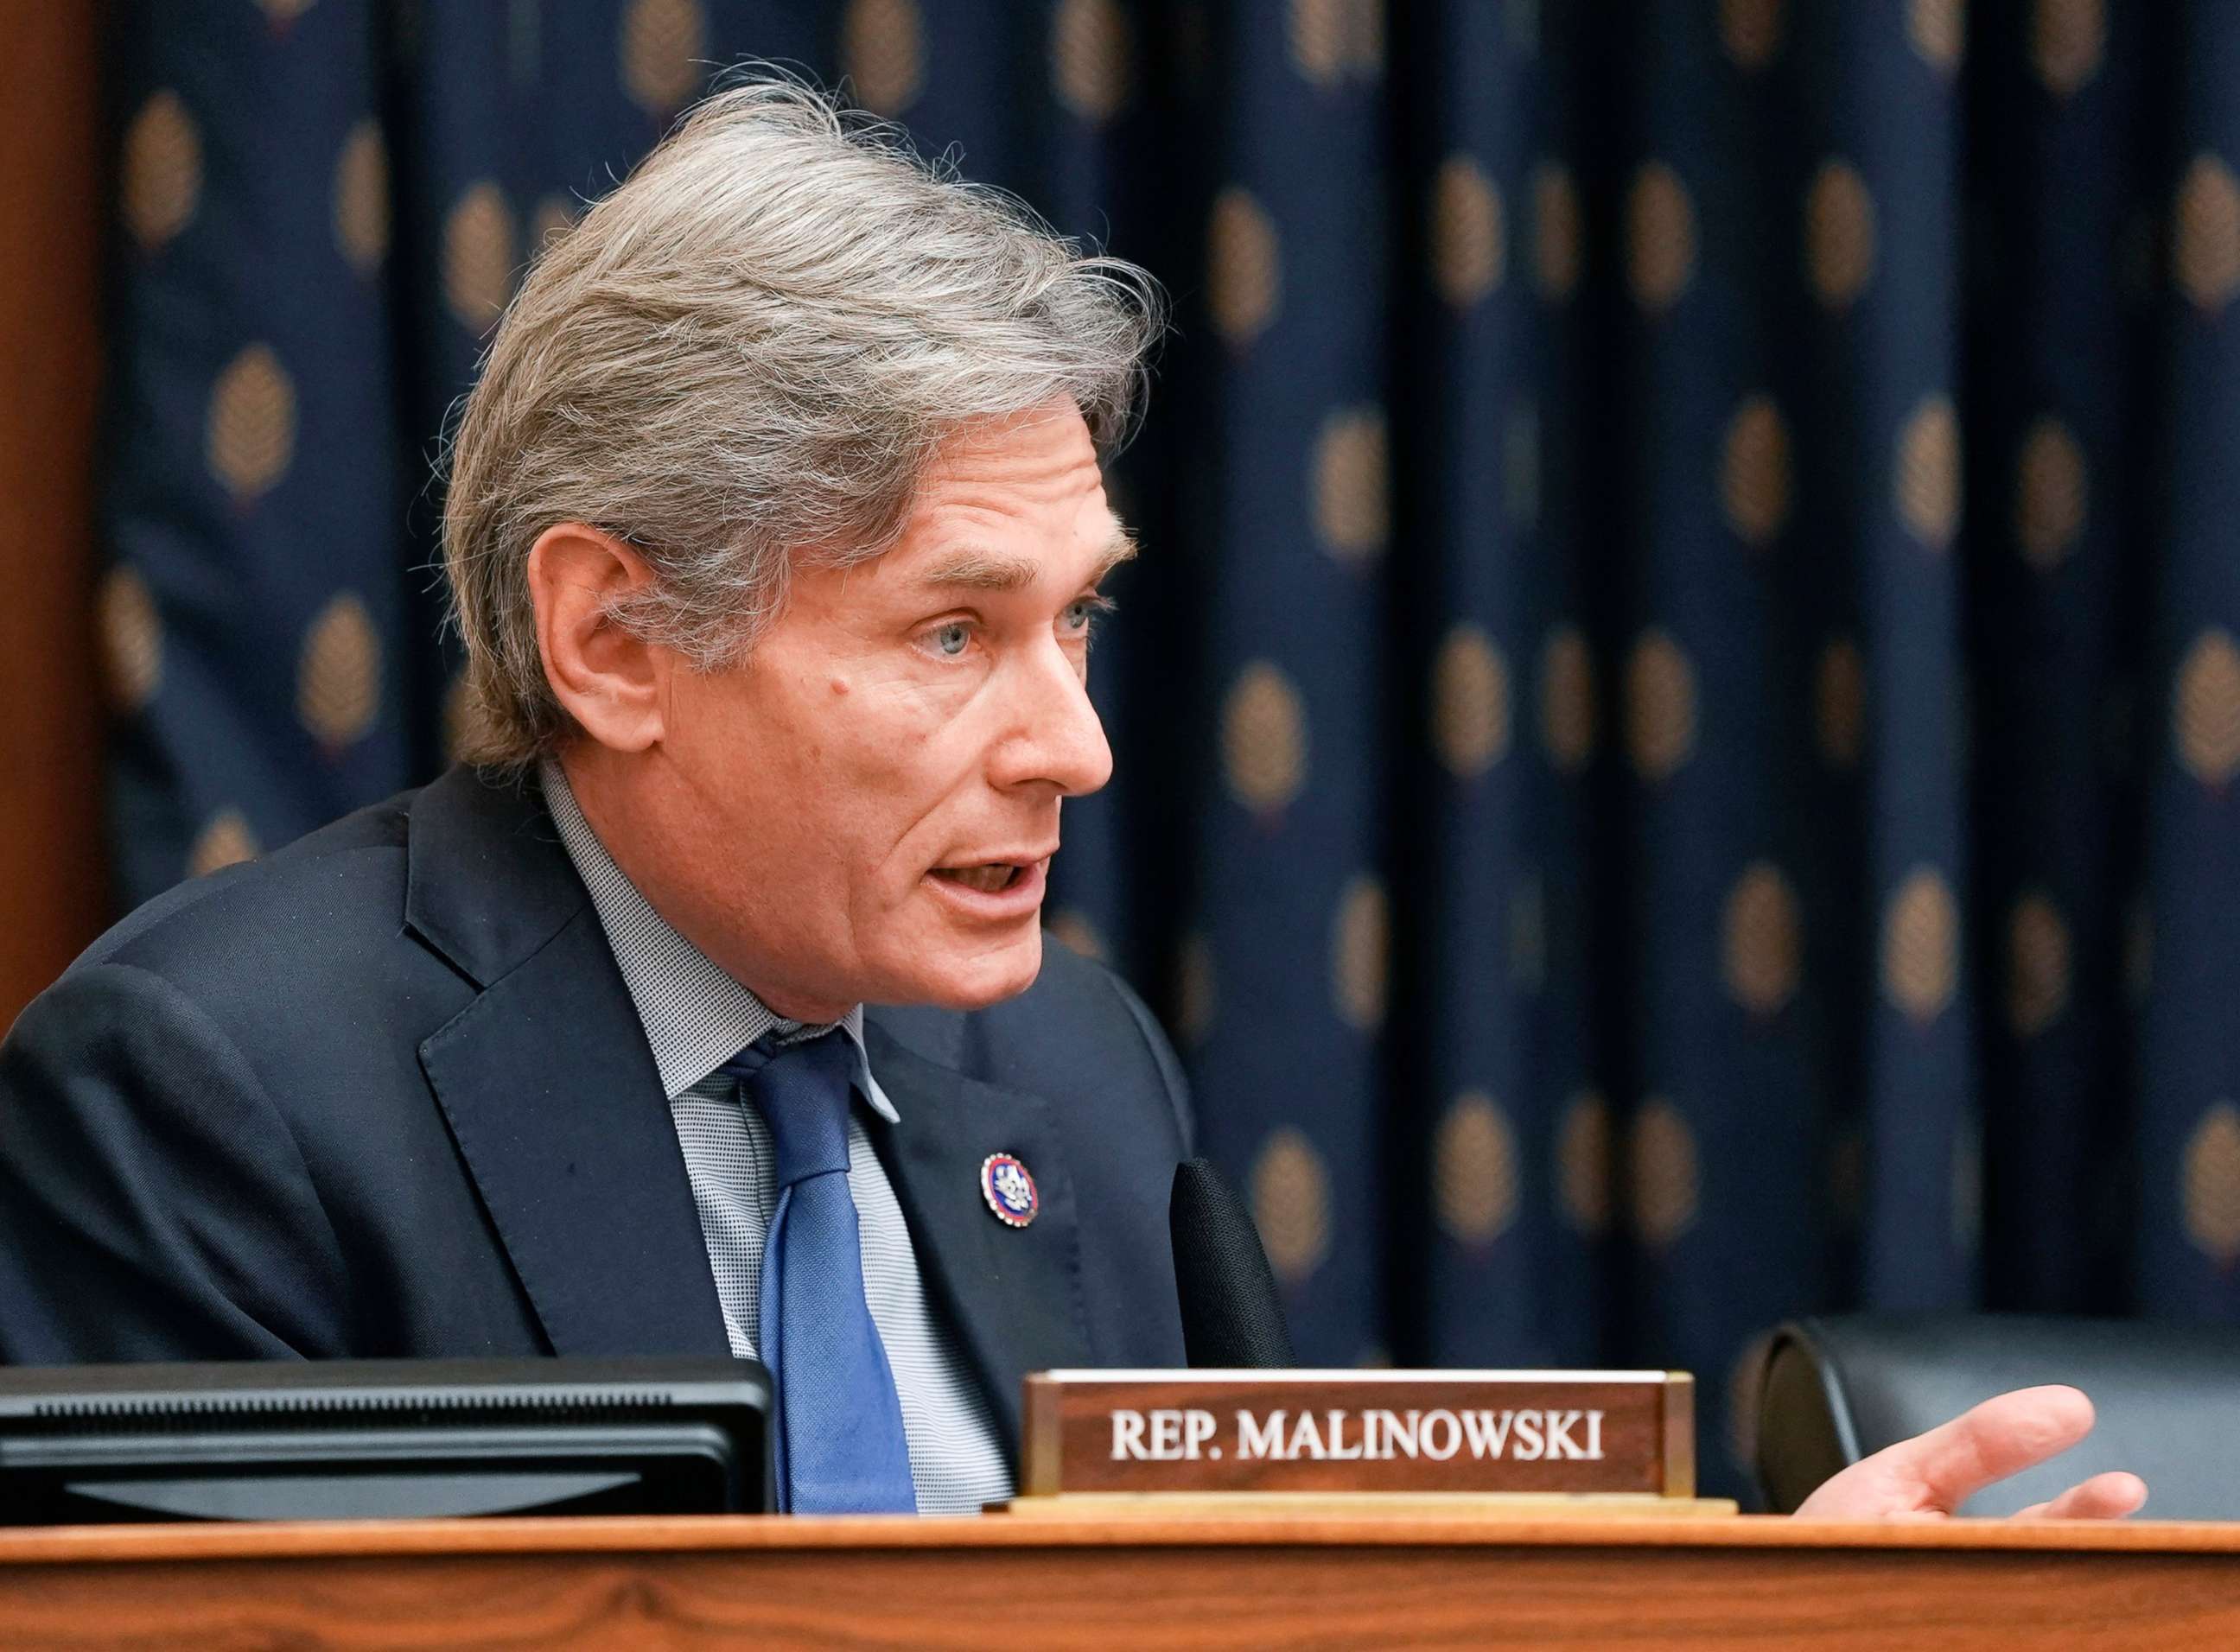 PHOTO: Rep. Tom Malinowski speaks during a hearing on Capitol Hill in Washington, March 10, 2021.